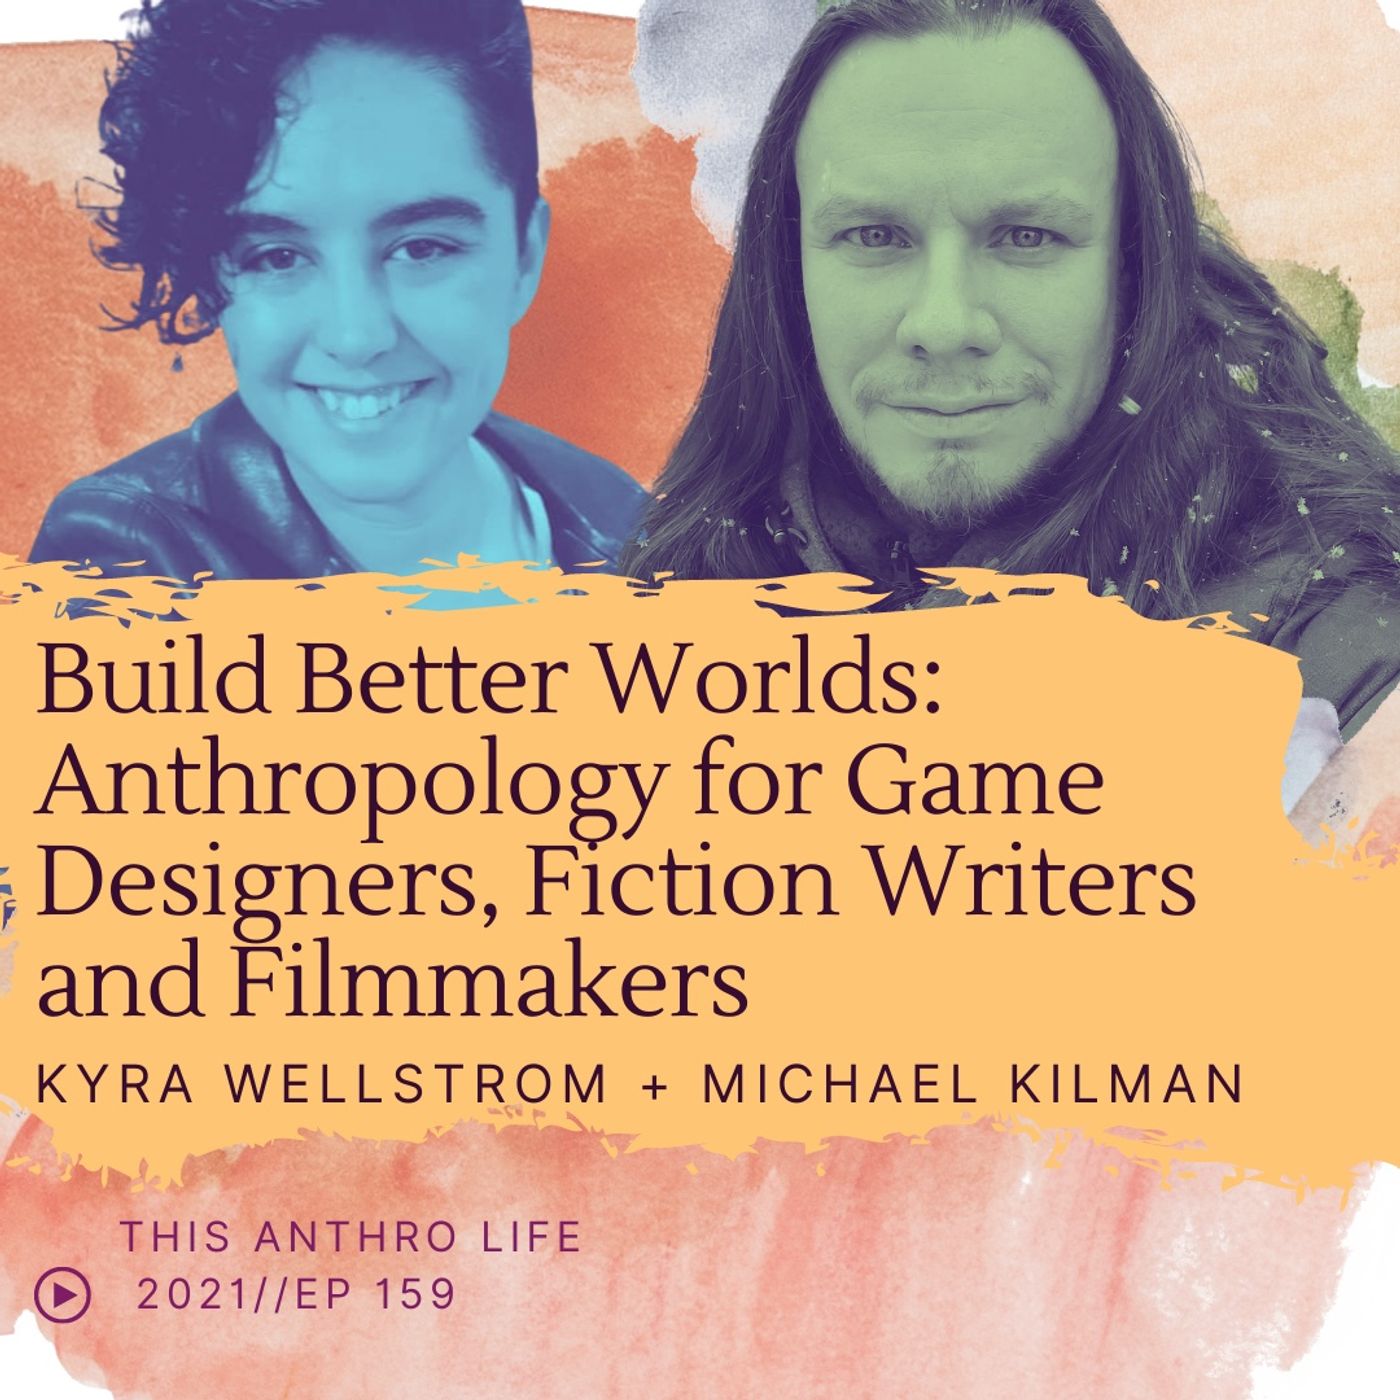 Build Better Worlds: Anthropology for Game Design, Film and Writing Image